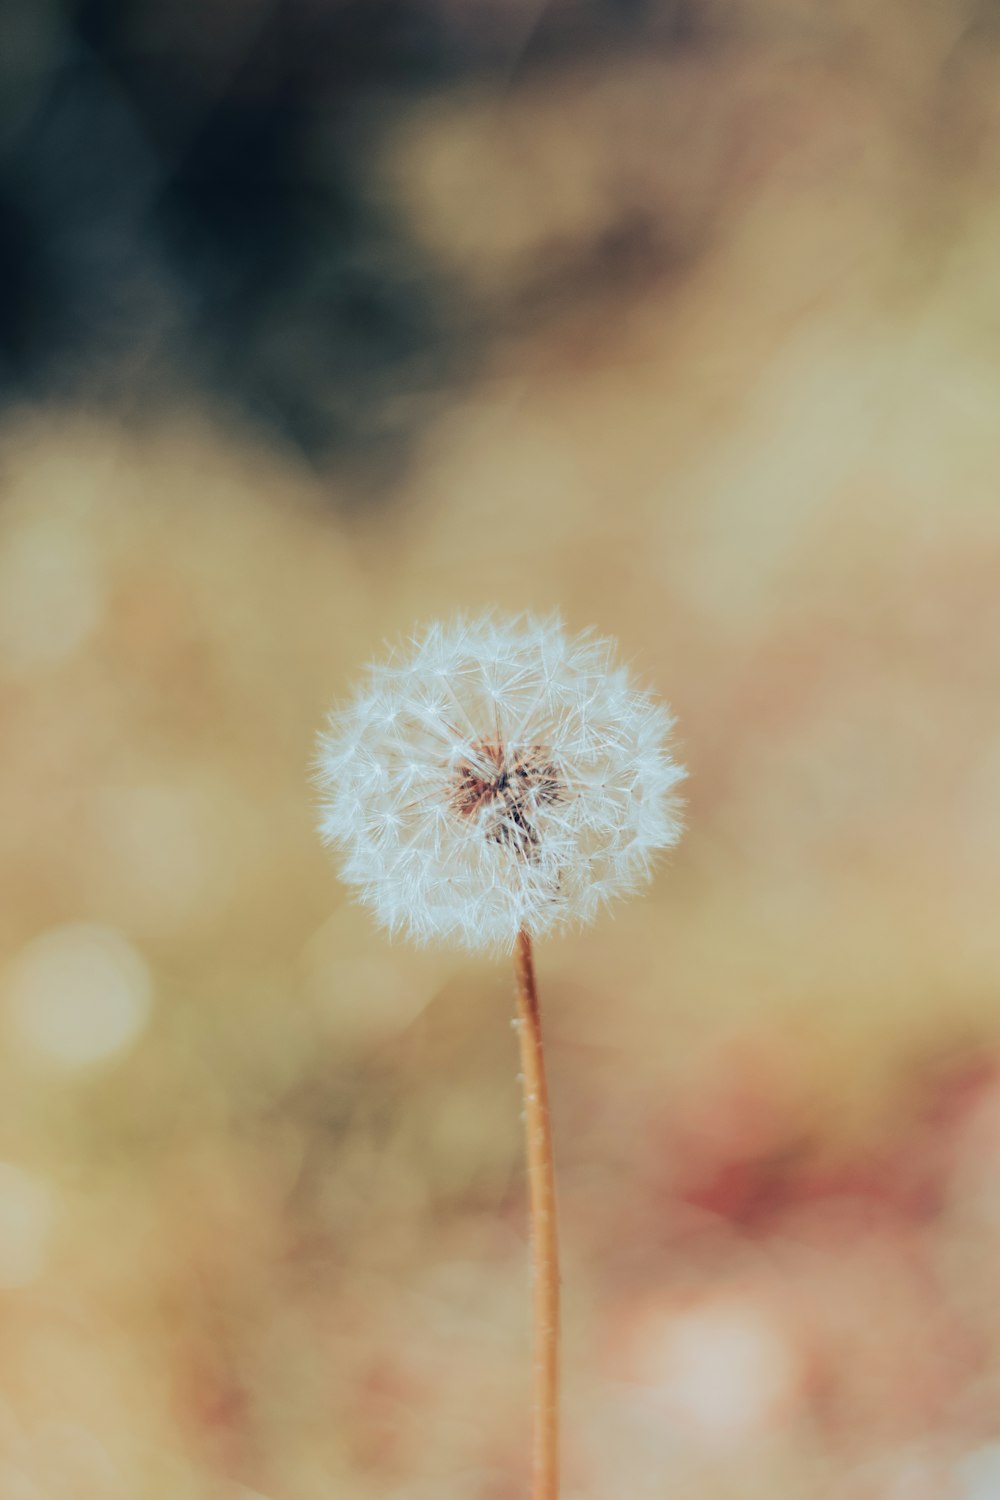 a dandelion in a vase with a blurry background